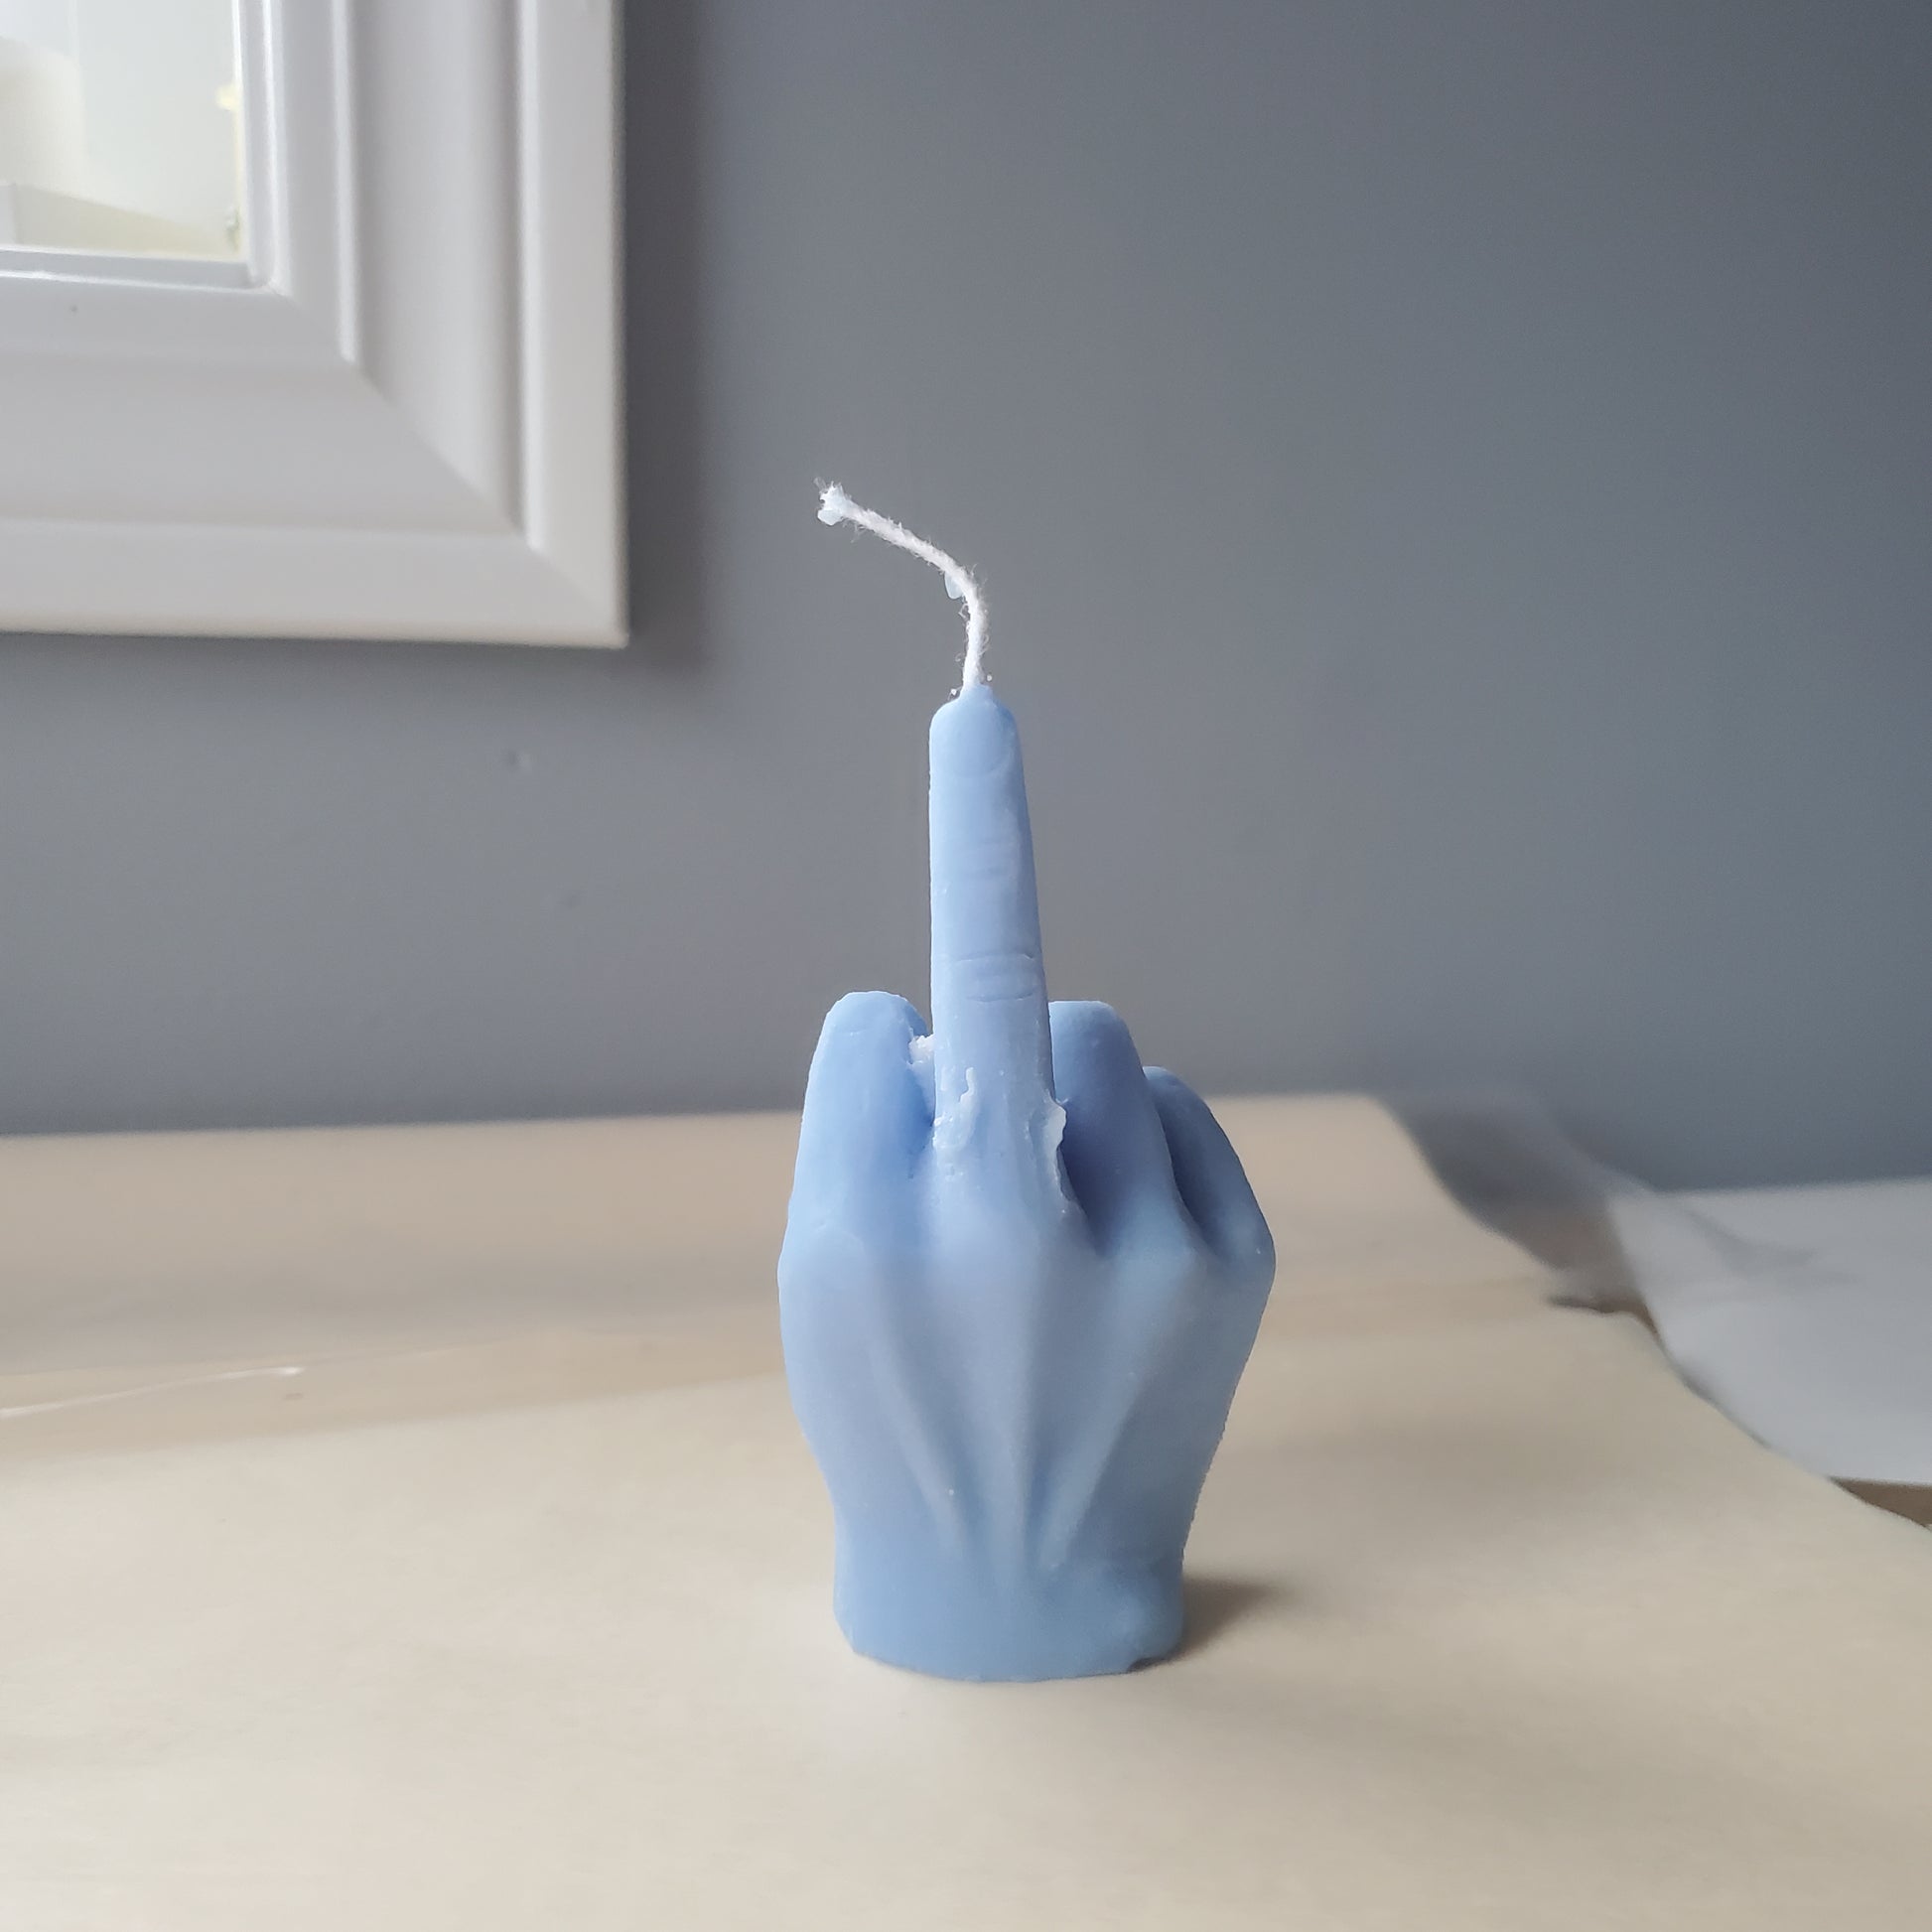 Middle Finger (Large) – YVR Candles